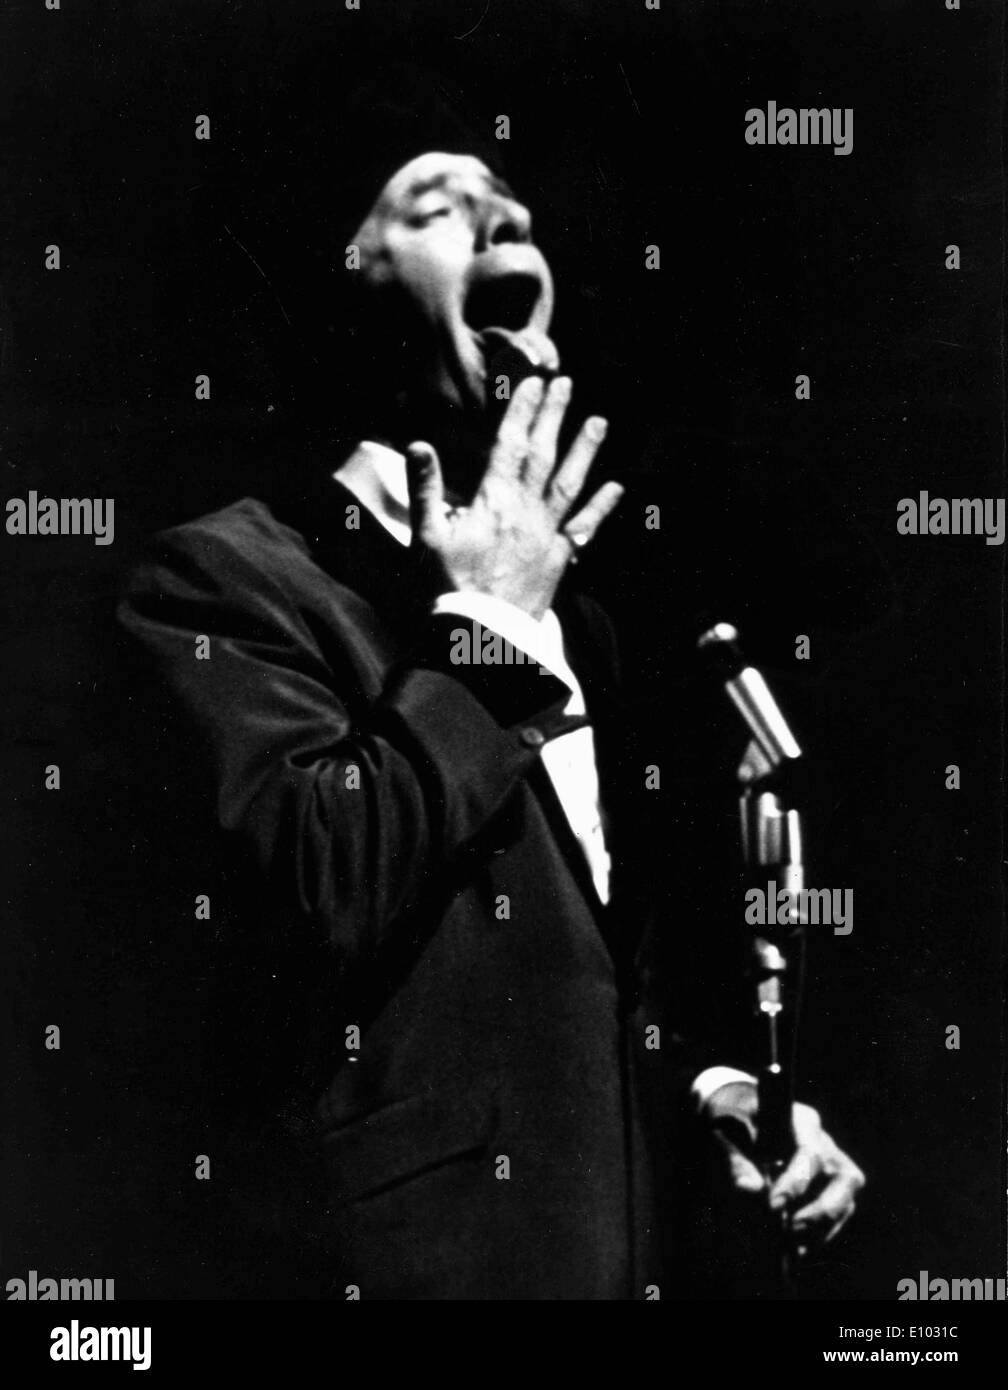 Comedian Jerry Lewis performs comedy in show Stock Photo